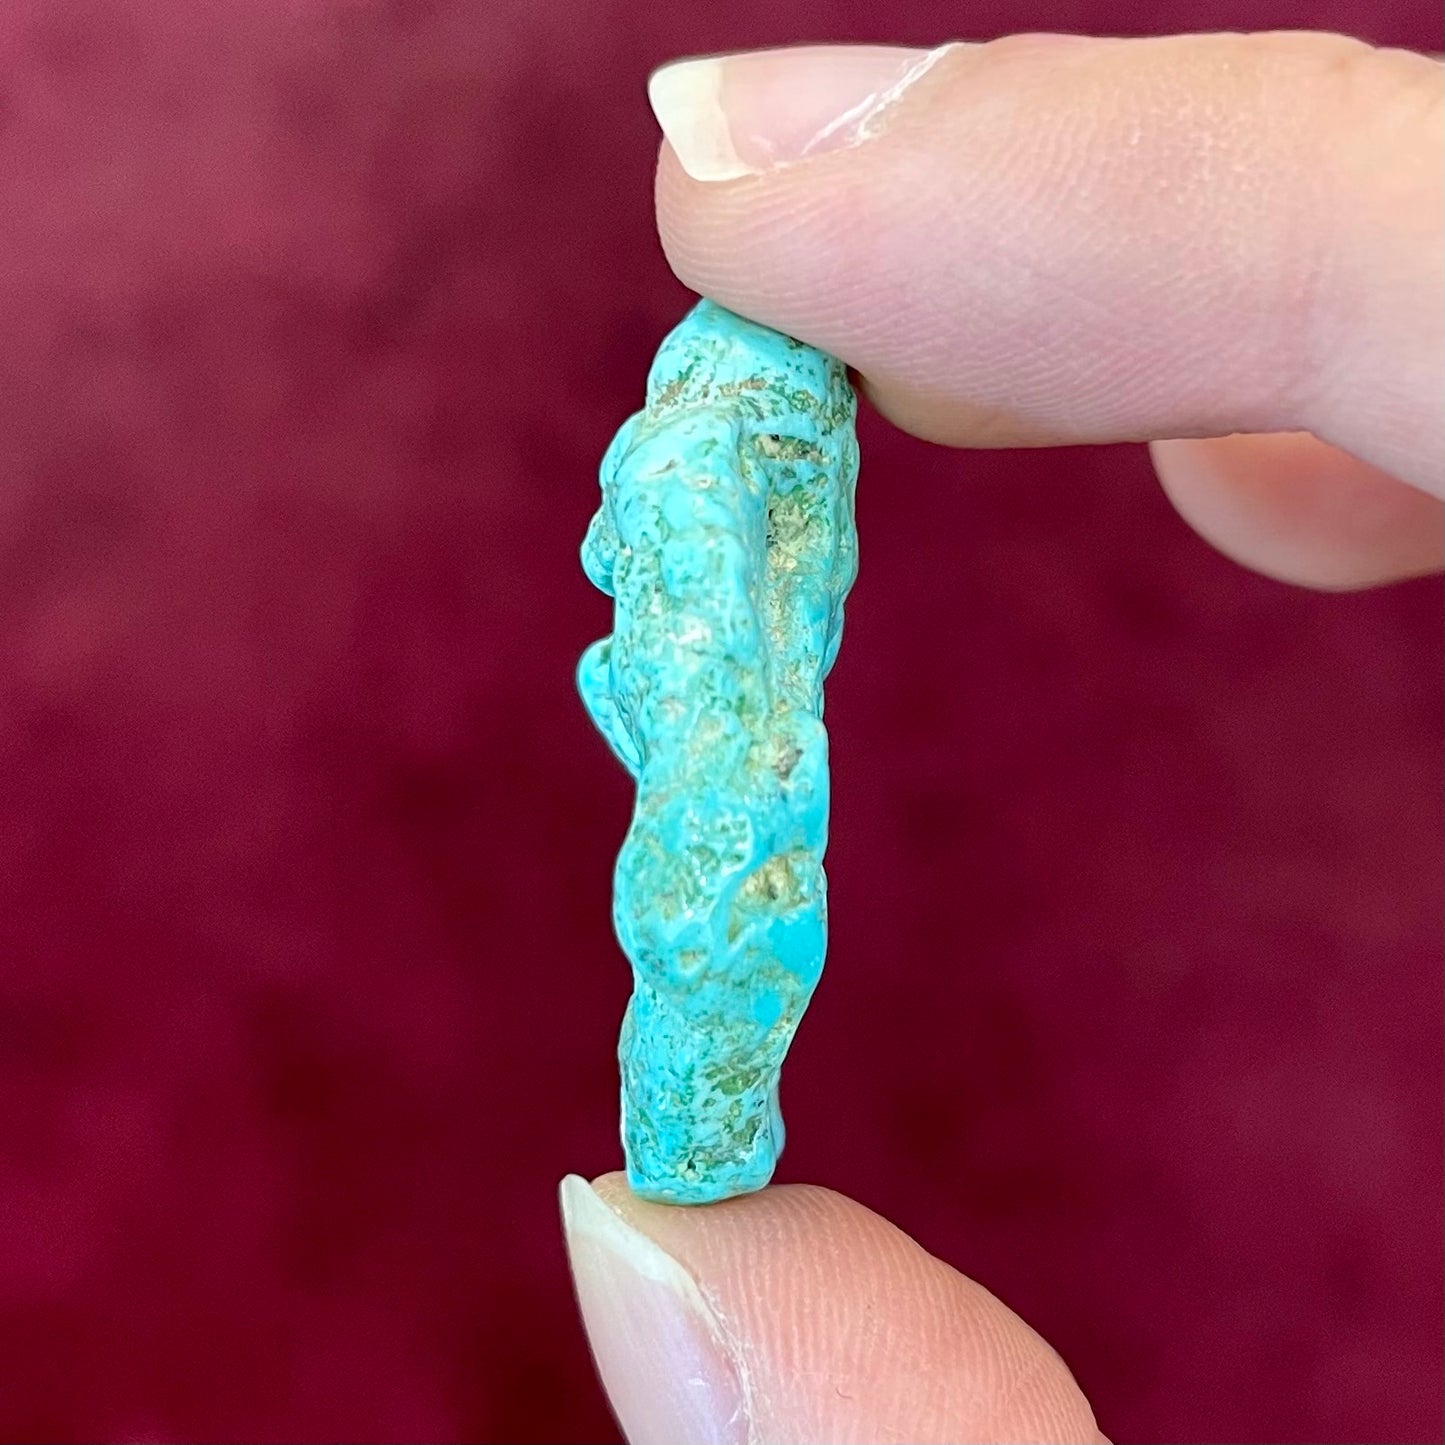 A loose, lightly polished nugget of Sleeping Beauty turquoise.